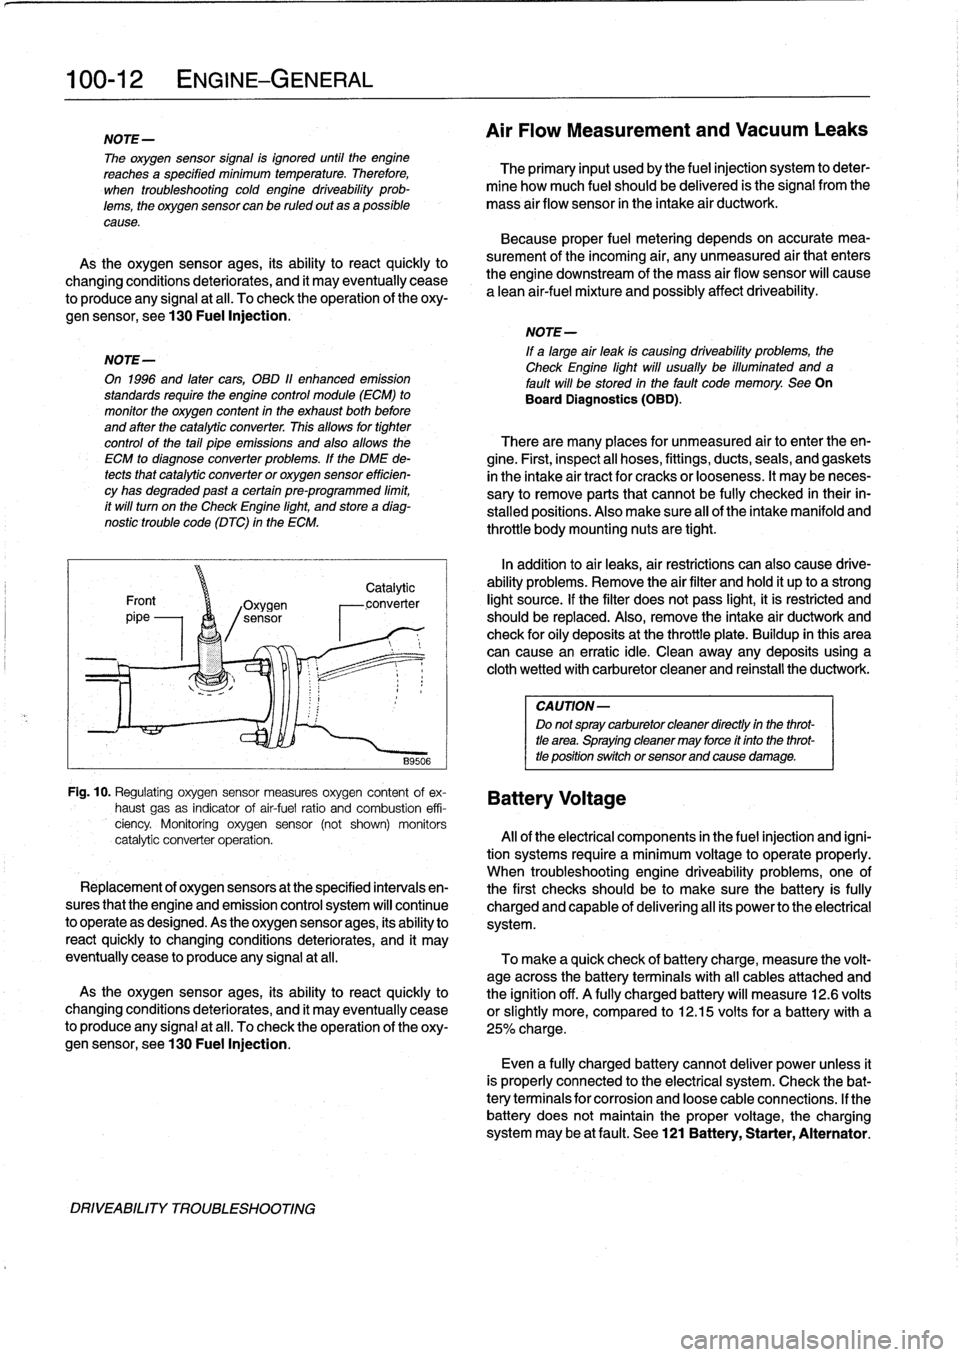 BMW 323i 1998 E36 Workshop Manual 
100-
1
2
ENGINE-GENERAL

NOTE-

The
oxygen
sensor
signal
is
ignored
until
the
engine
reachesa
specified
minimum
temperature
.
Therefore,

	

The
primary
input
usedby
the
fuel
injection
system
to
dete